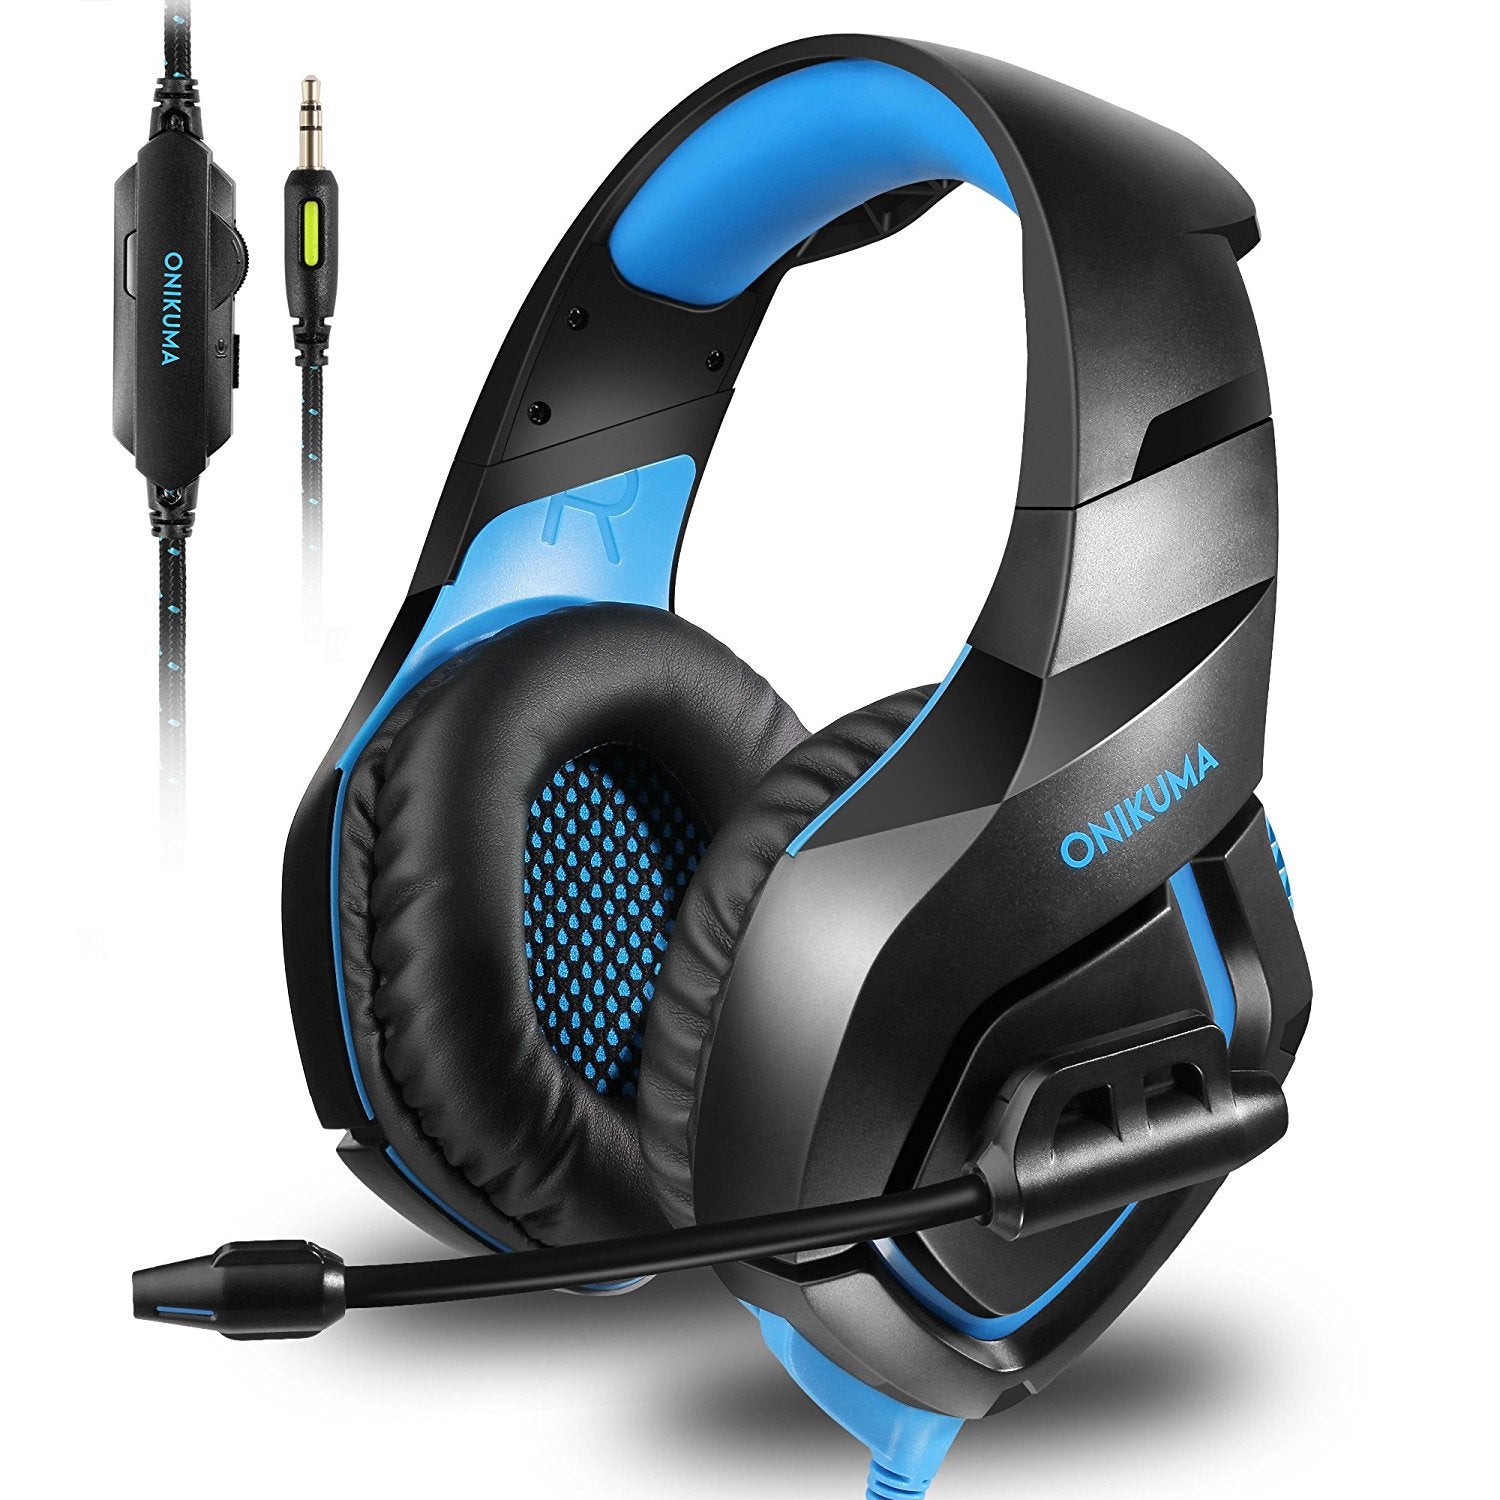 The Computer Gaming Headset